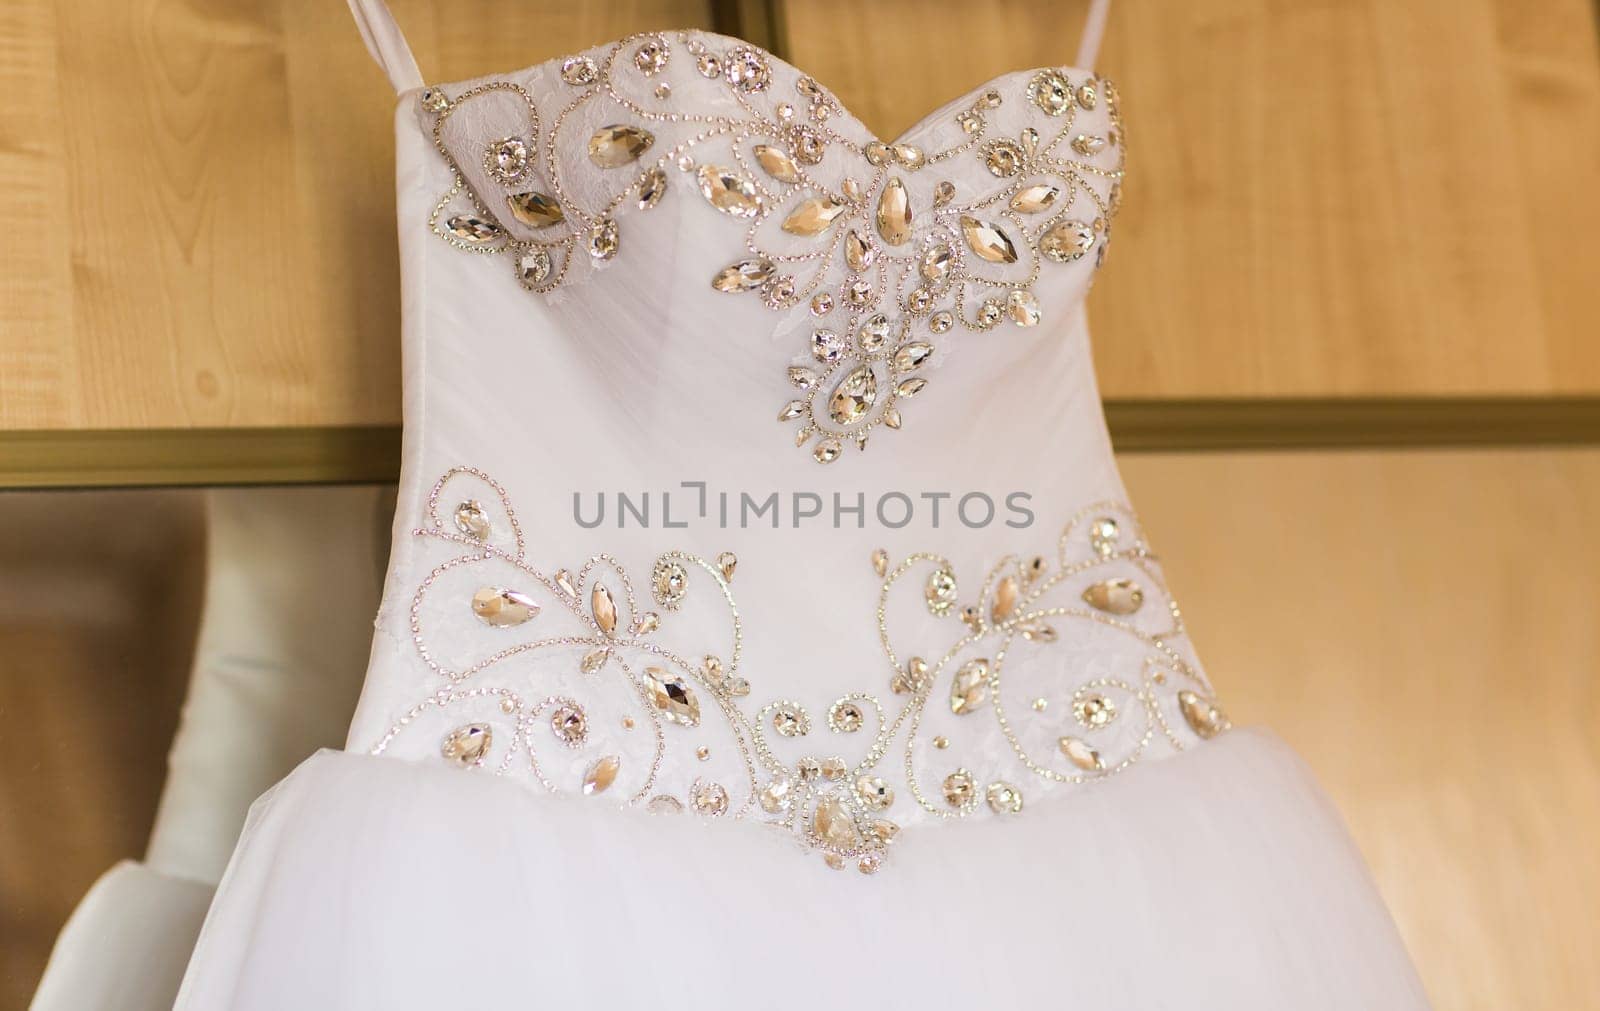 The perfect wedding dress on a hanger in room of bride by Satura86